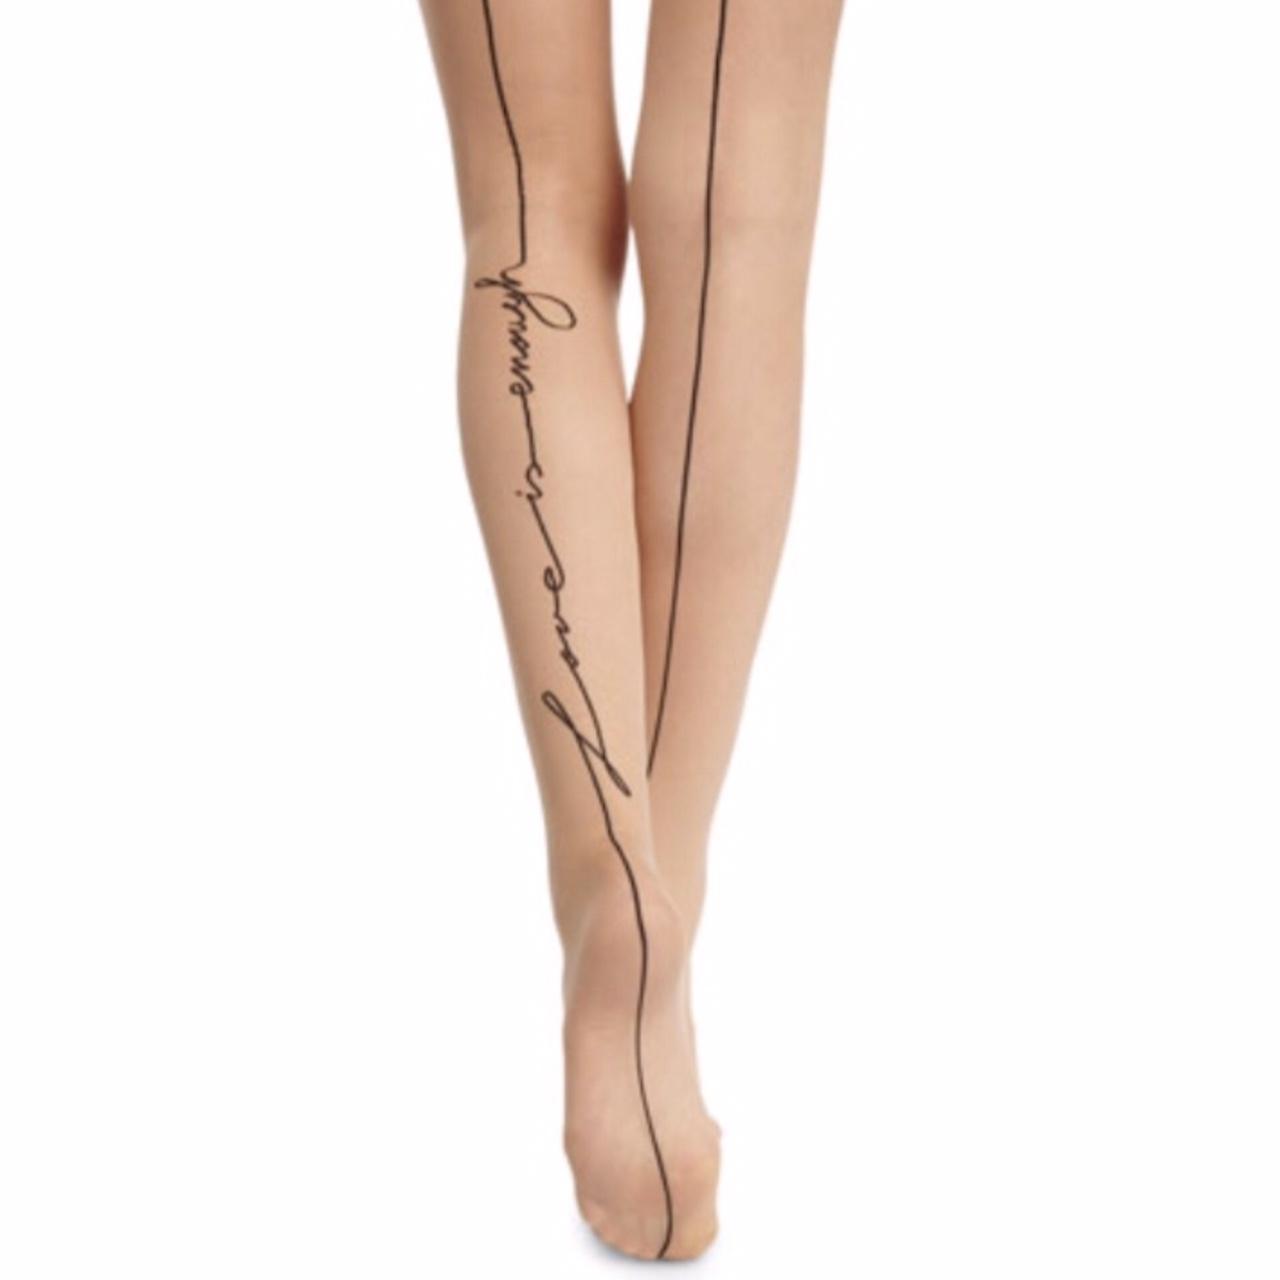 Product Image 2 - Wolford Tights...
Sheer matte tights with